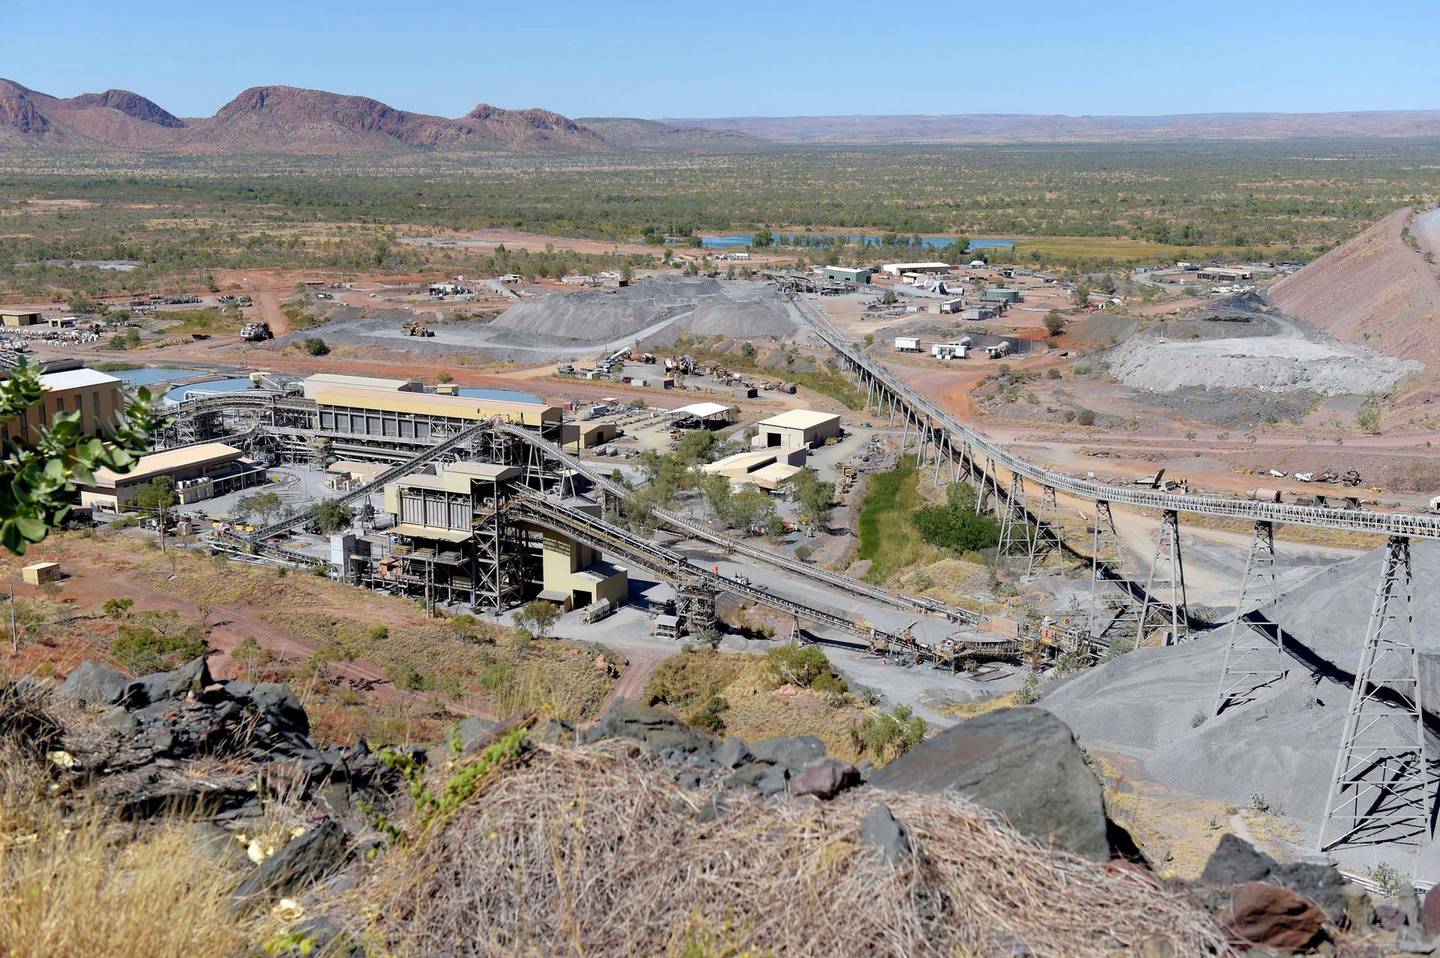 The Argyle diamond mine operated by the Rio Tinto Group stands in the East Kimberly region of Western Australia, Australia, on Thursday, July 11, 2019. The world’s biggest diamond mine ⁠— famed more for the fistful of coveted pink and red gems it yields each year than being a major producer of lower-quality stones ⁠— is being shuttered by Rio Tinto after almost four decades. Photographer: Carla Gottgens/Bloomberg